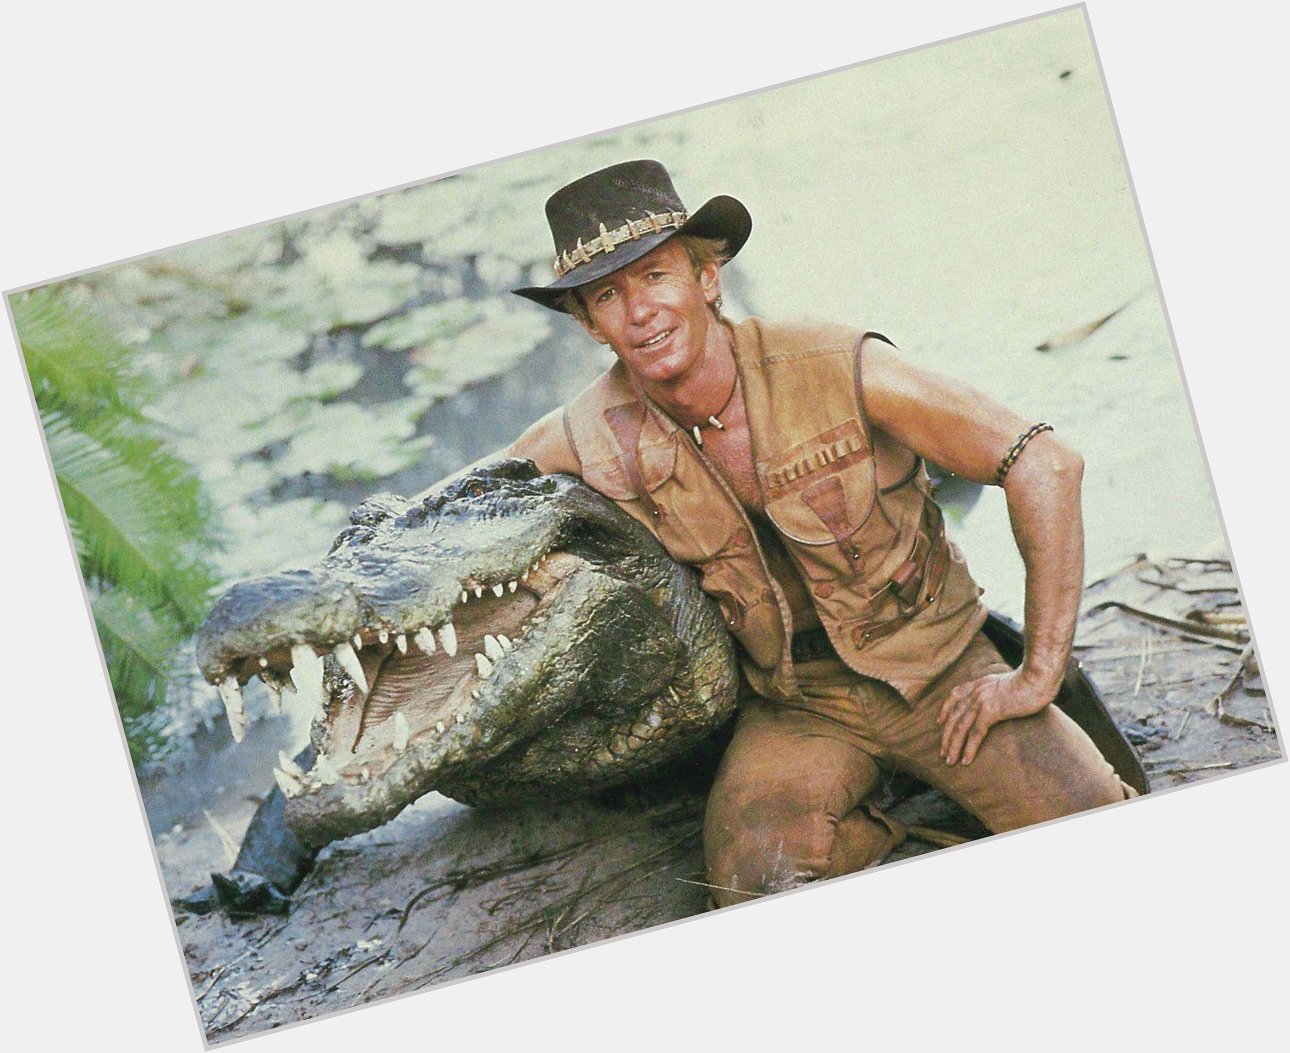 Happy Birthday to Steve Irwin, the one and only 